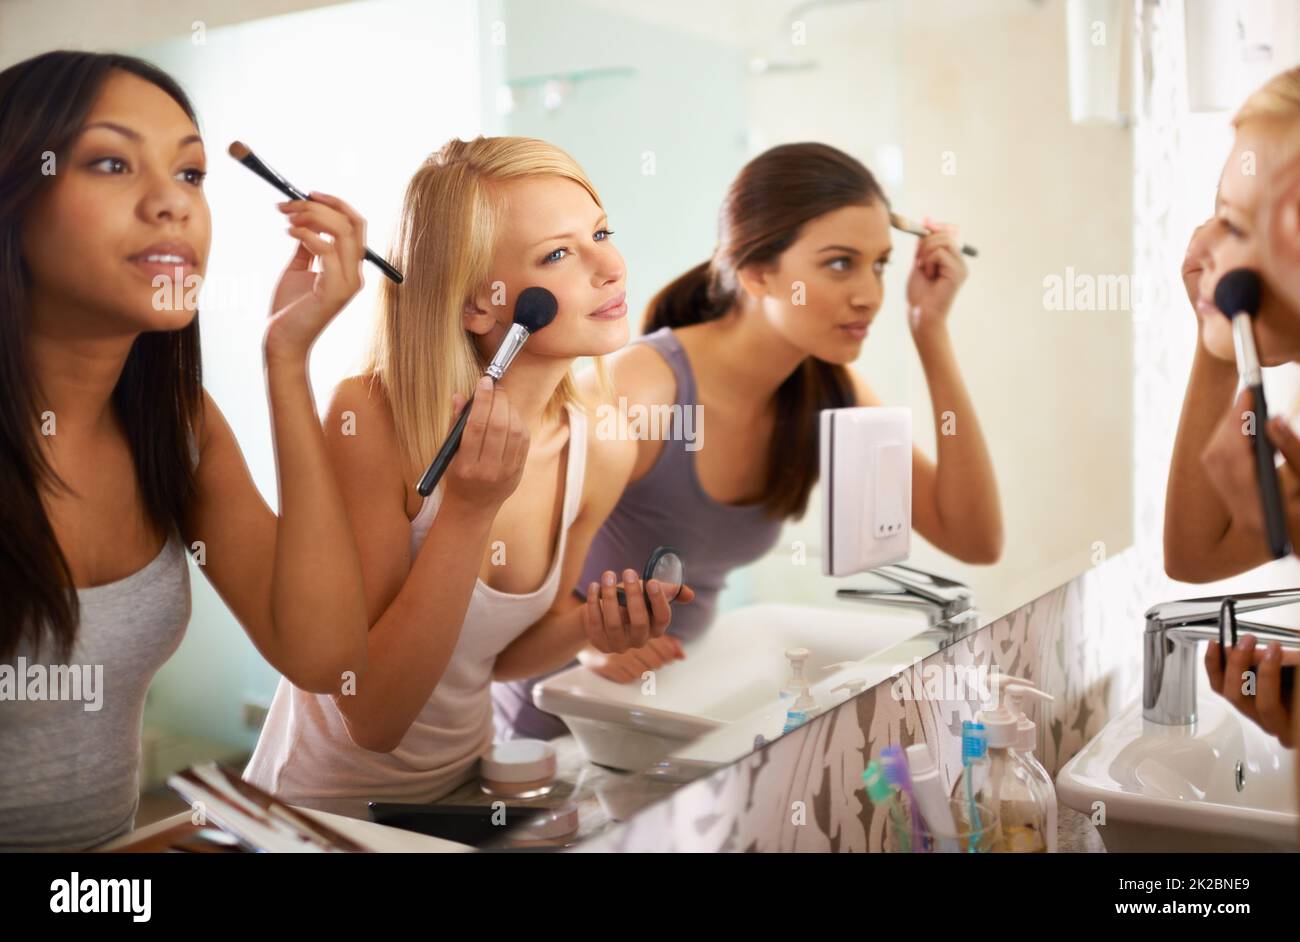 Beauty Queens. Shot of three friends applying makeup in front of the mirror. Stock Photo